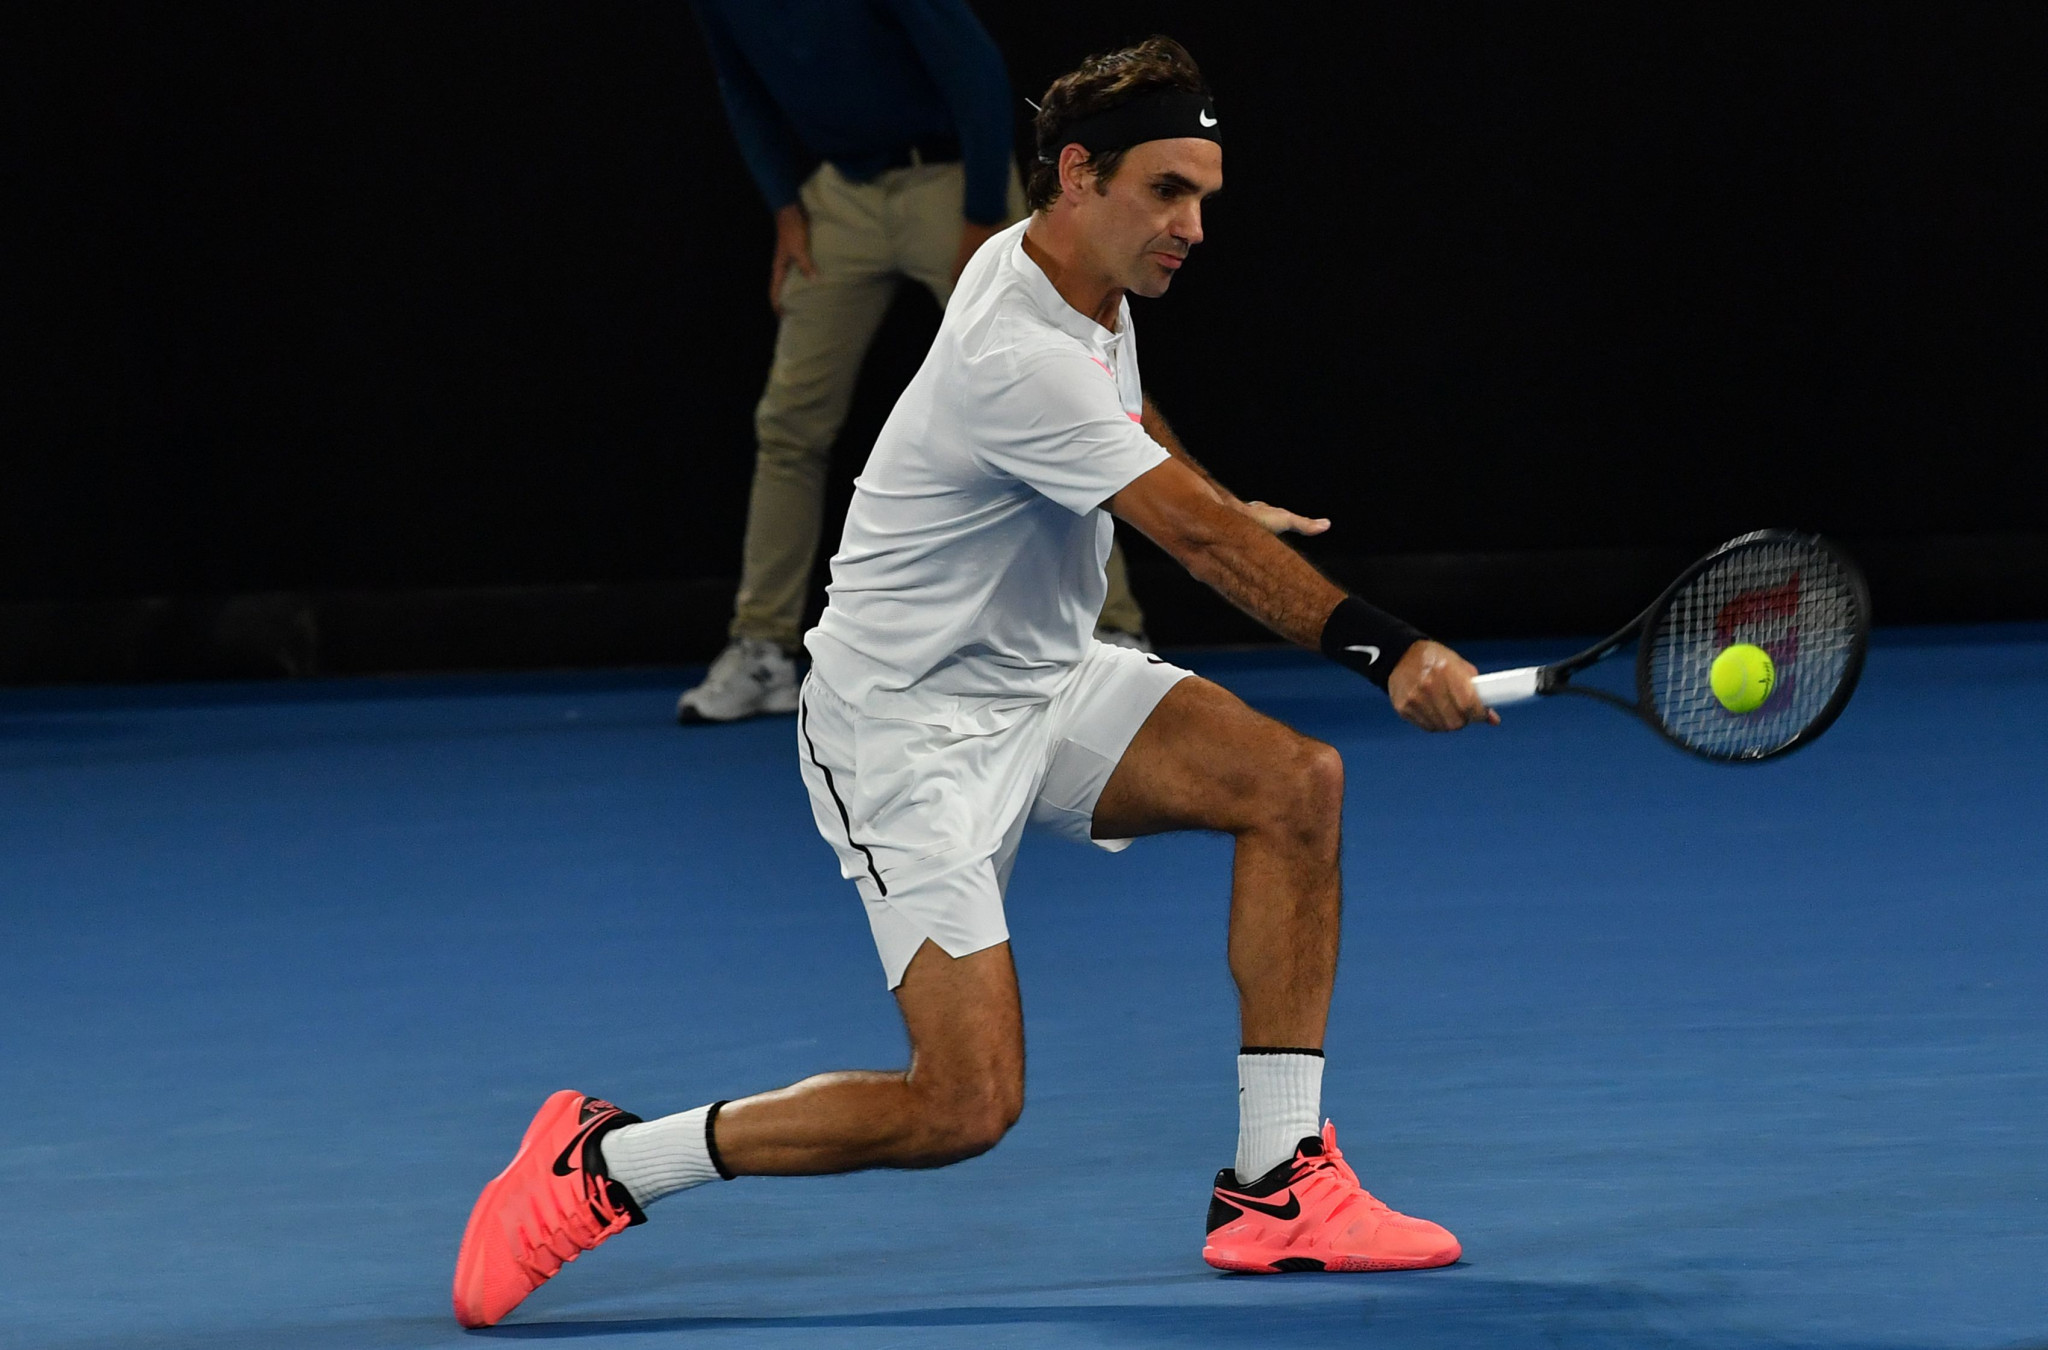 Federer surges into Australian Open semi-finals with straight-sets win over Berdych 